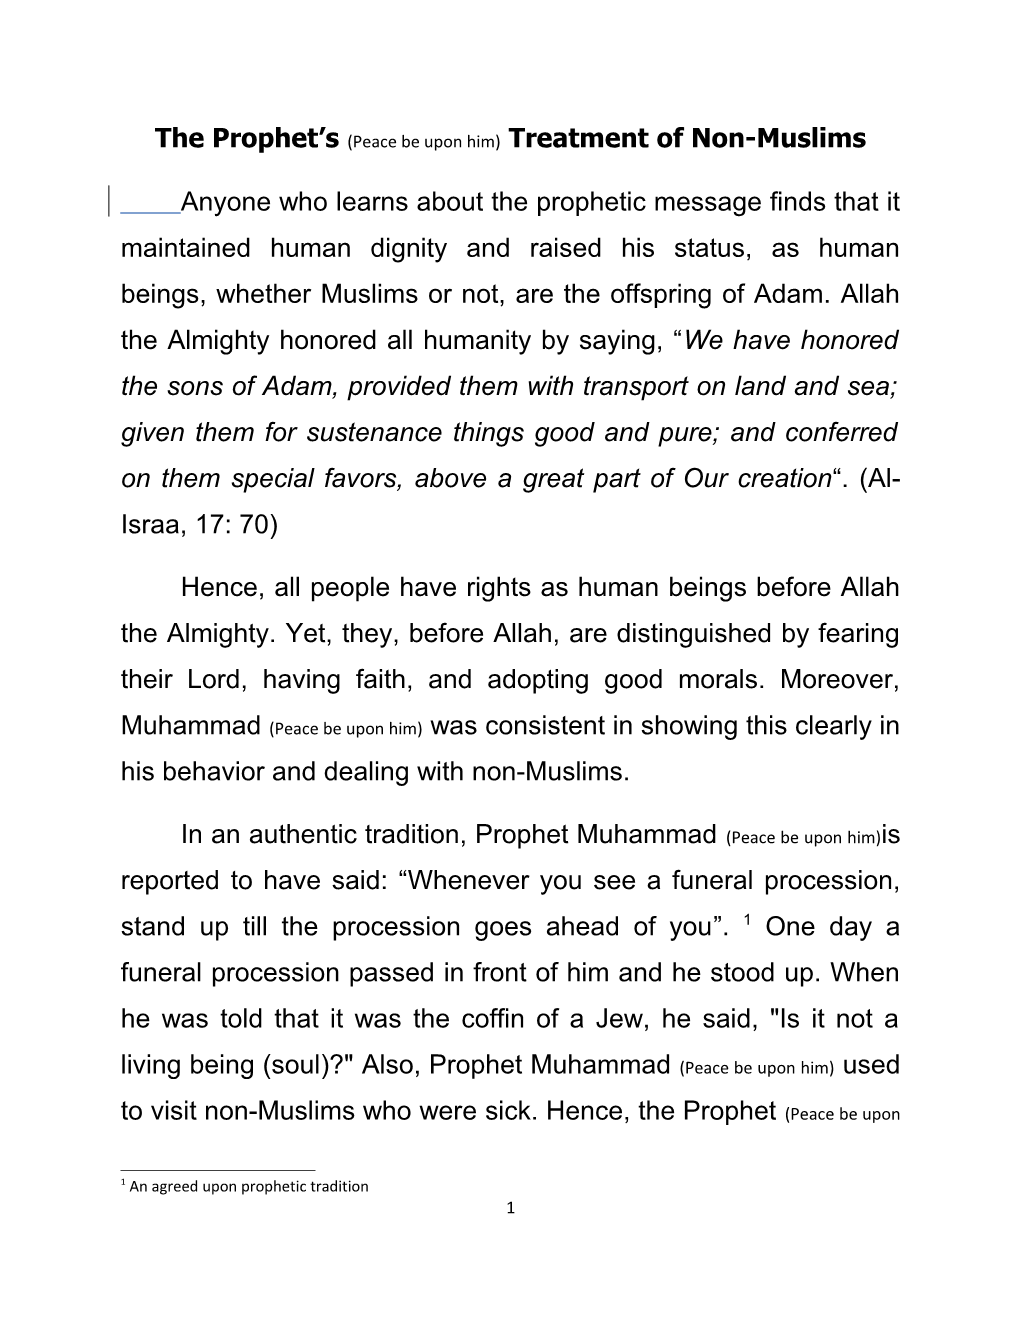 The Prophet S Treatment of Non-Muslims